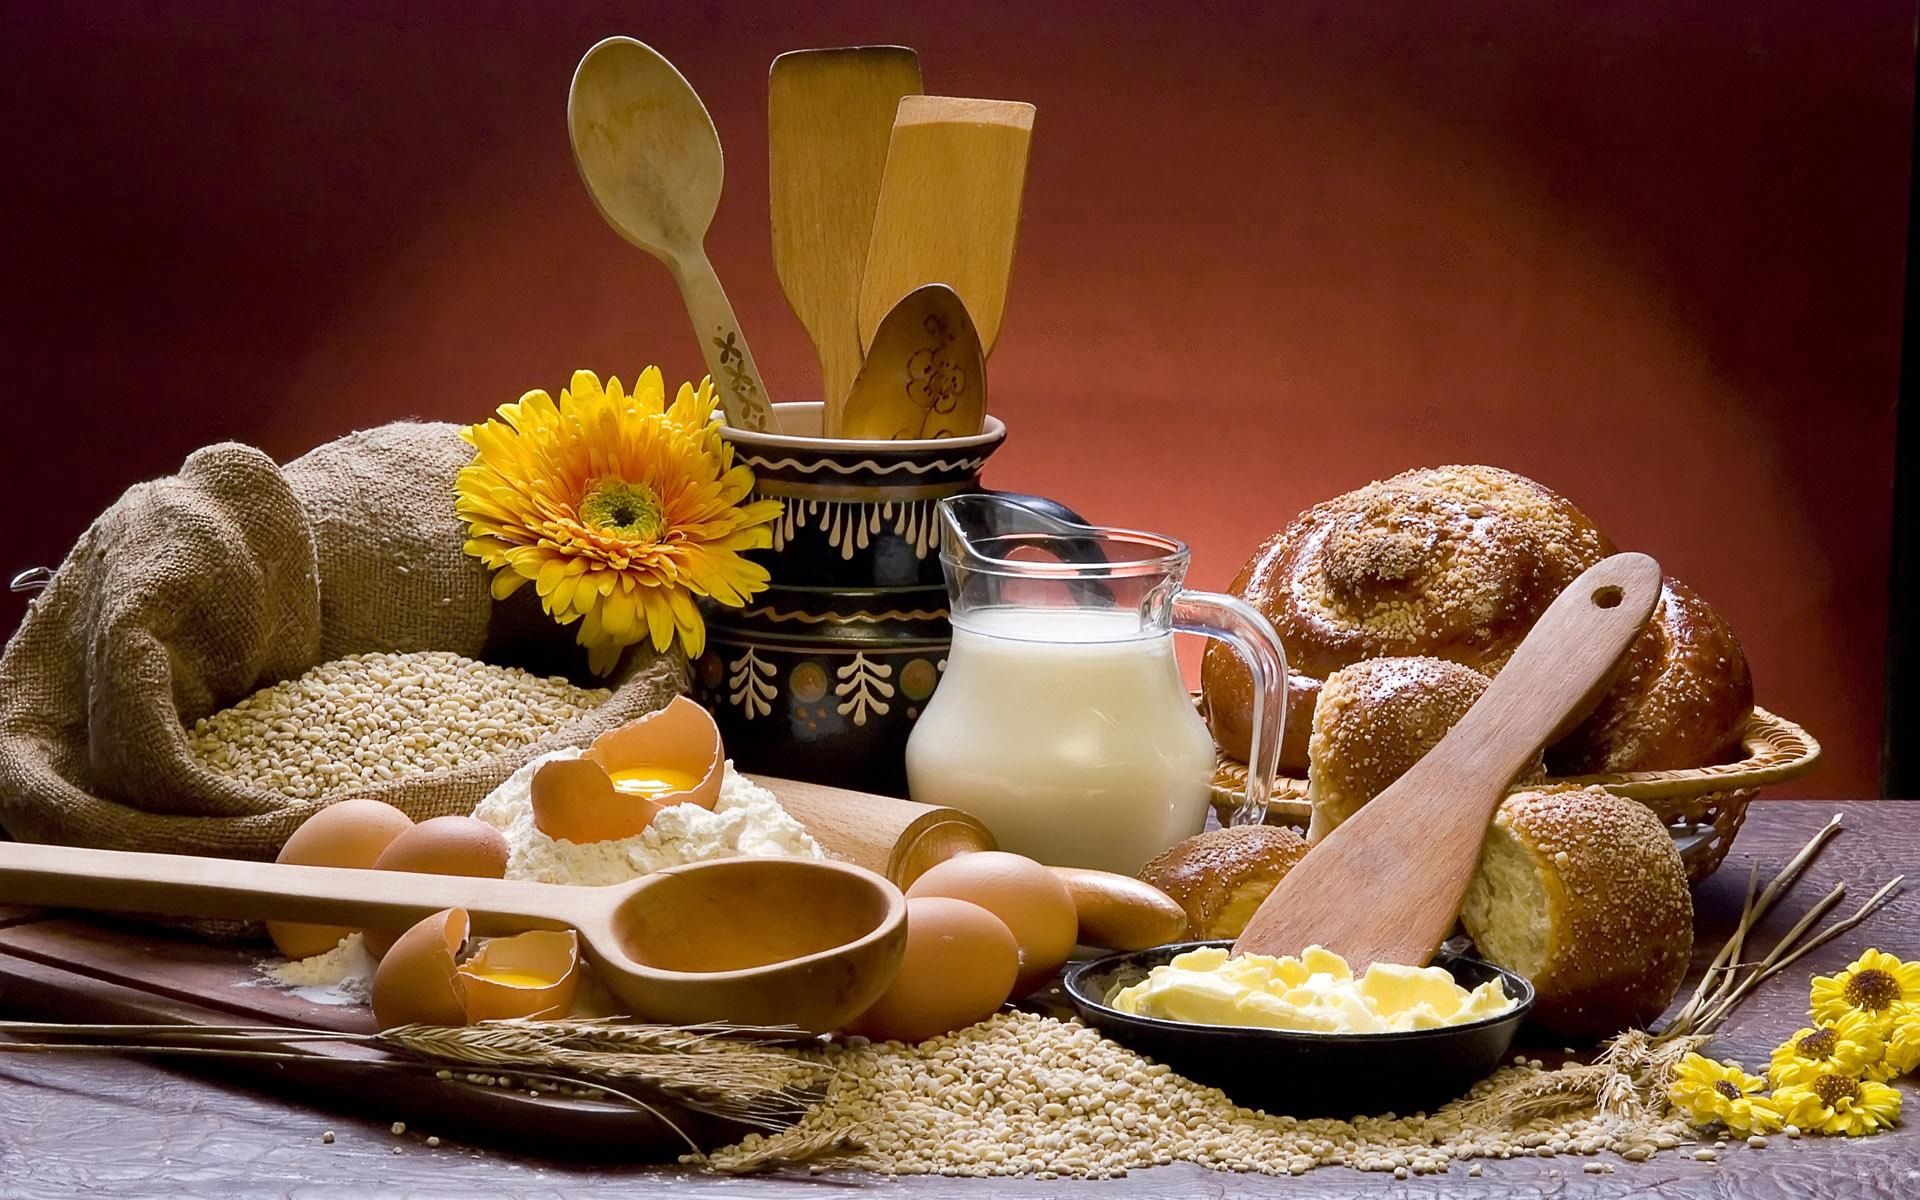 flour, baking, eggs, food, bakery products, decanter, carafe, bread, milk, groats